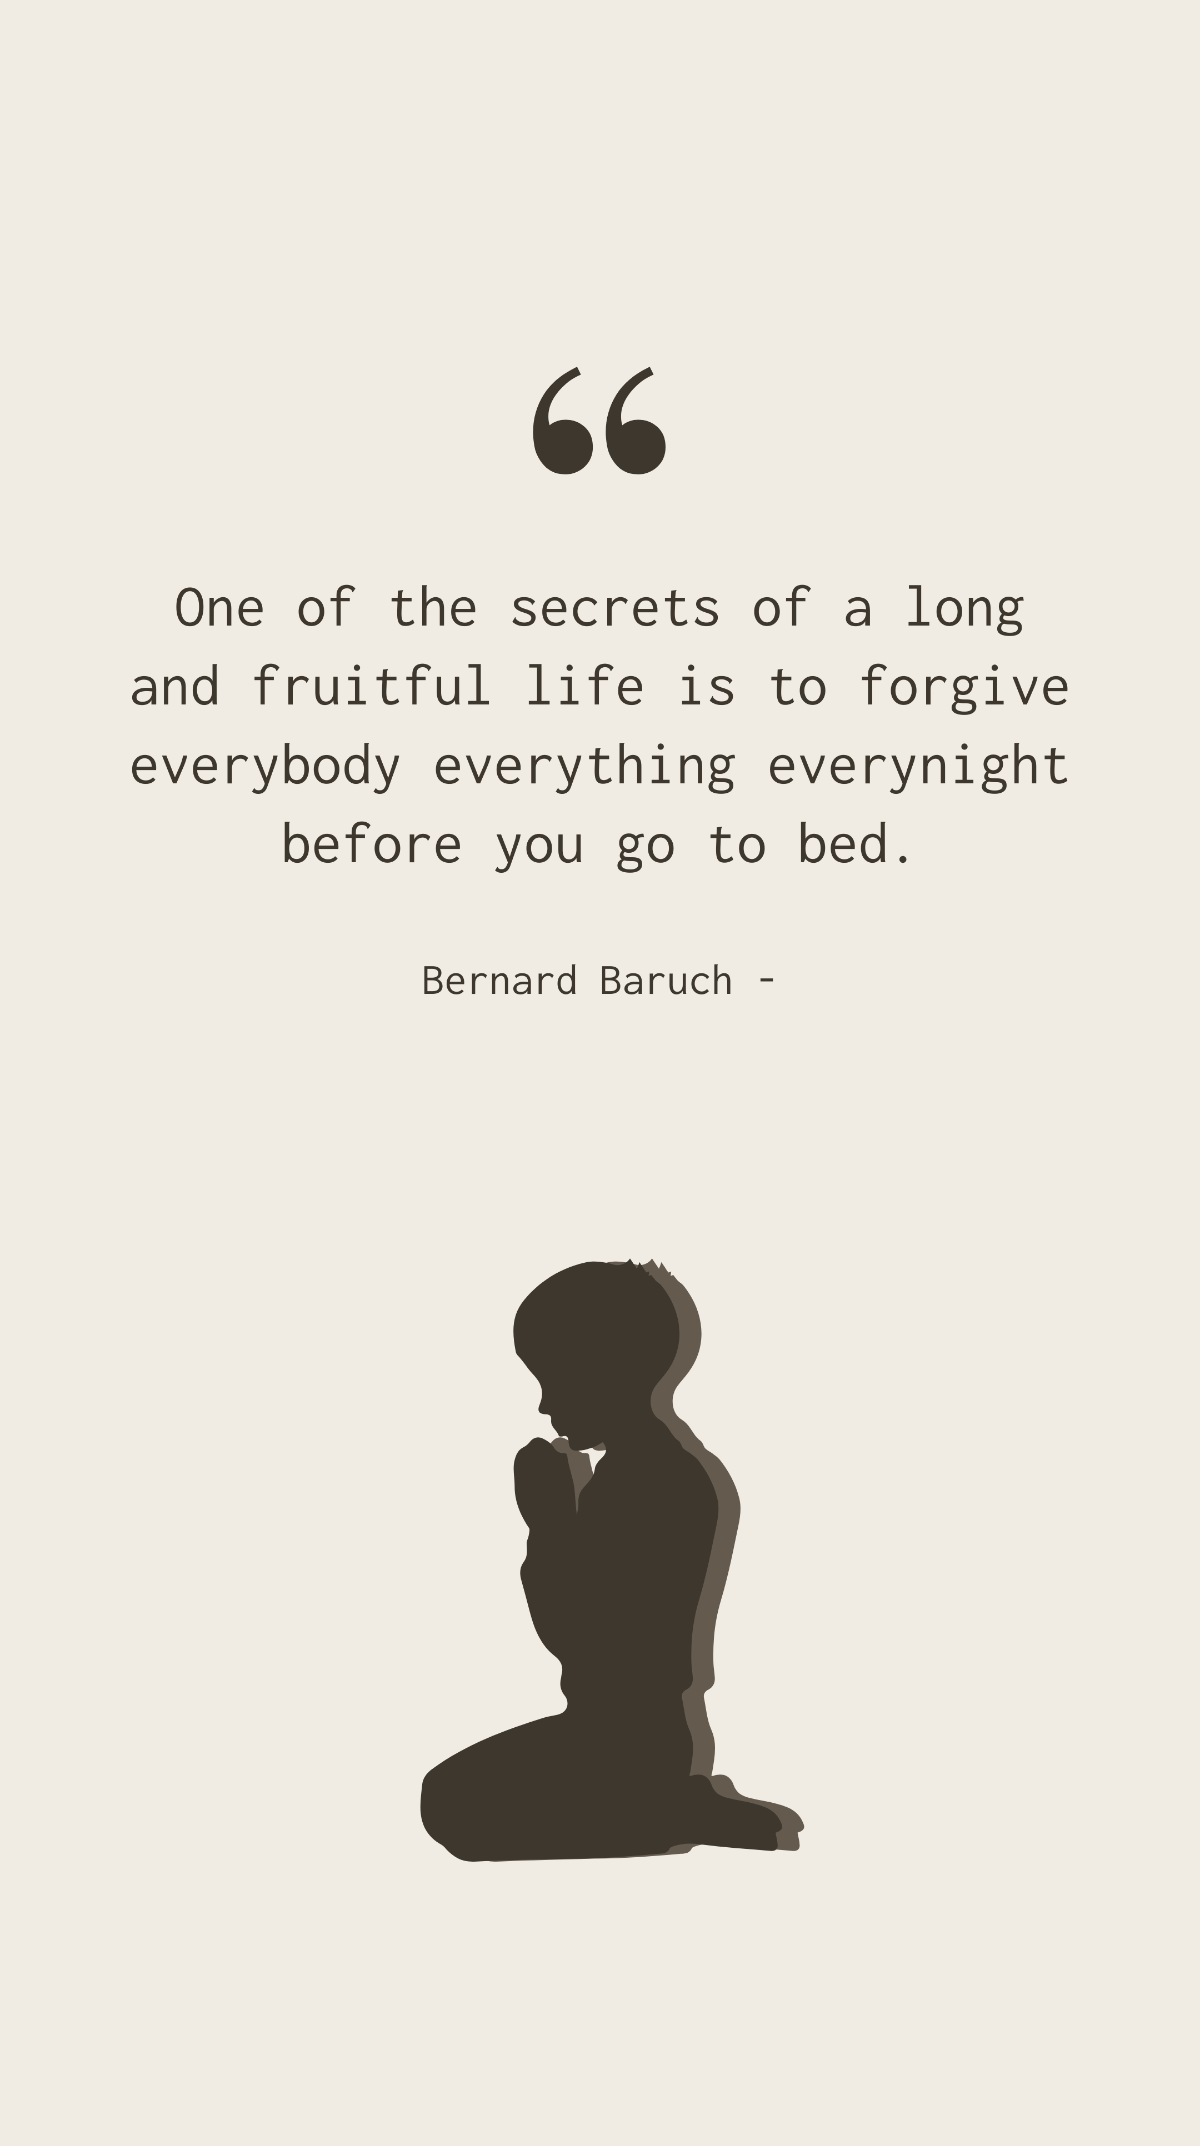 Bernard Baruch - One of the secrets of a long and fruitful life is to forgive everybody everything everynight before you go to bed. Template